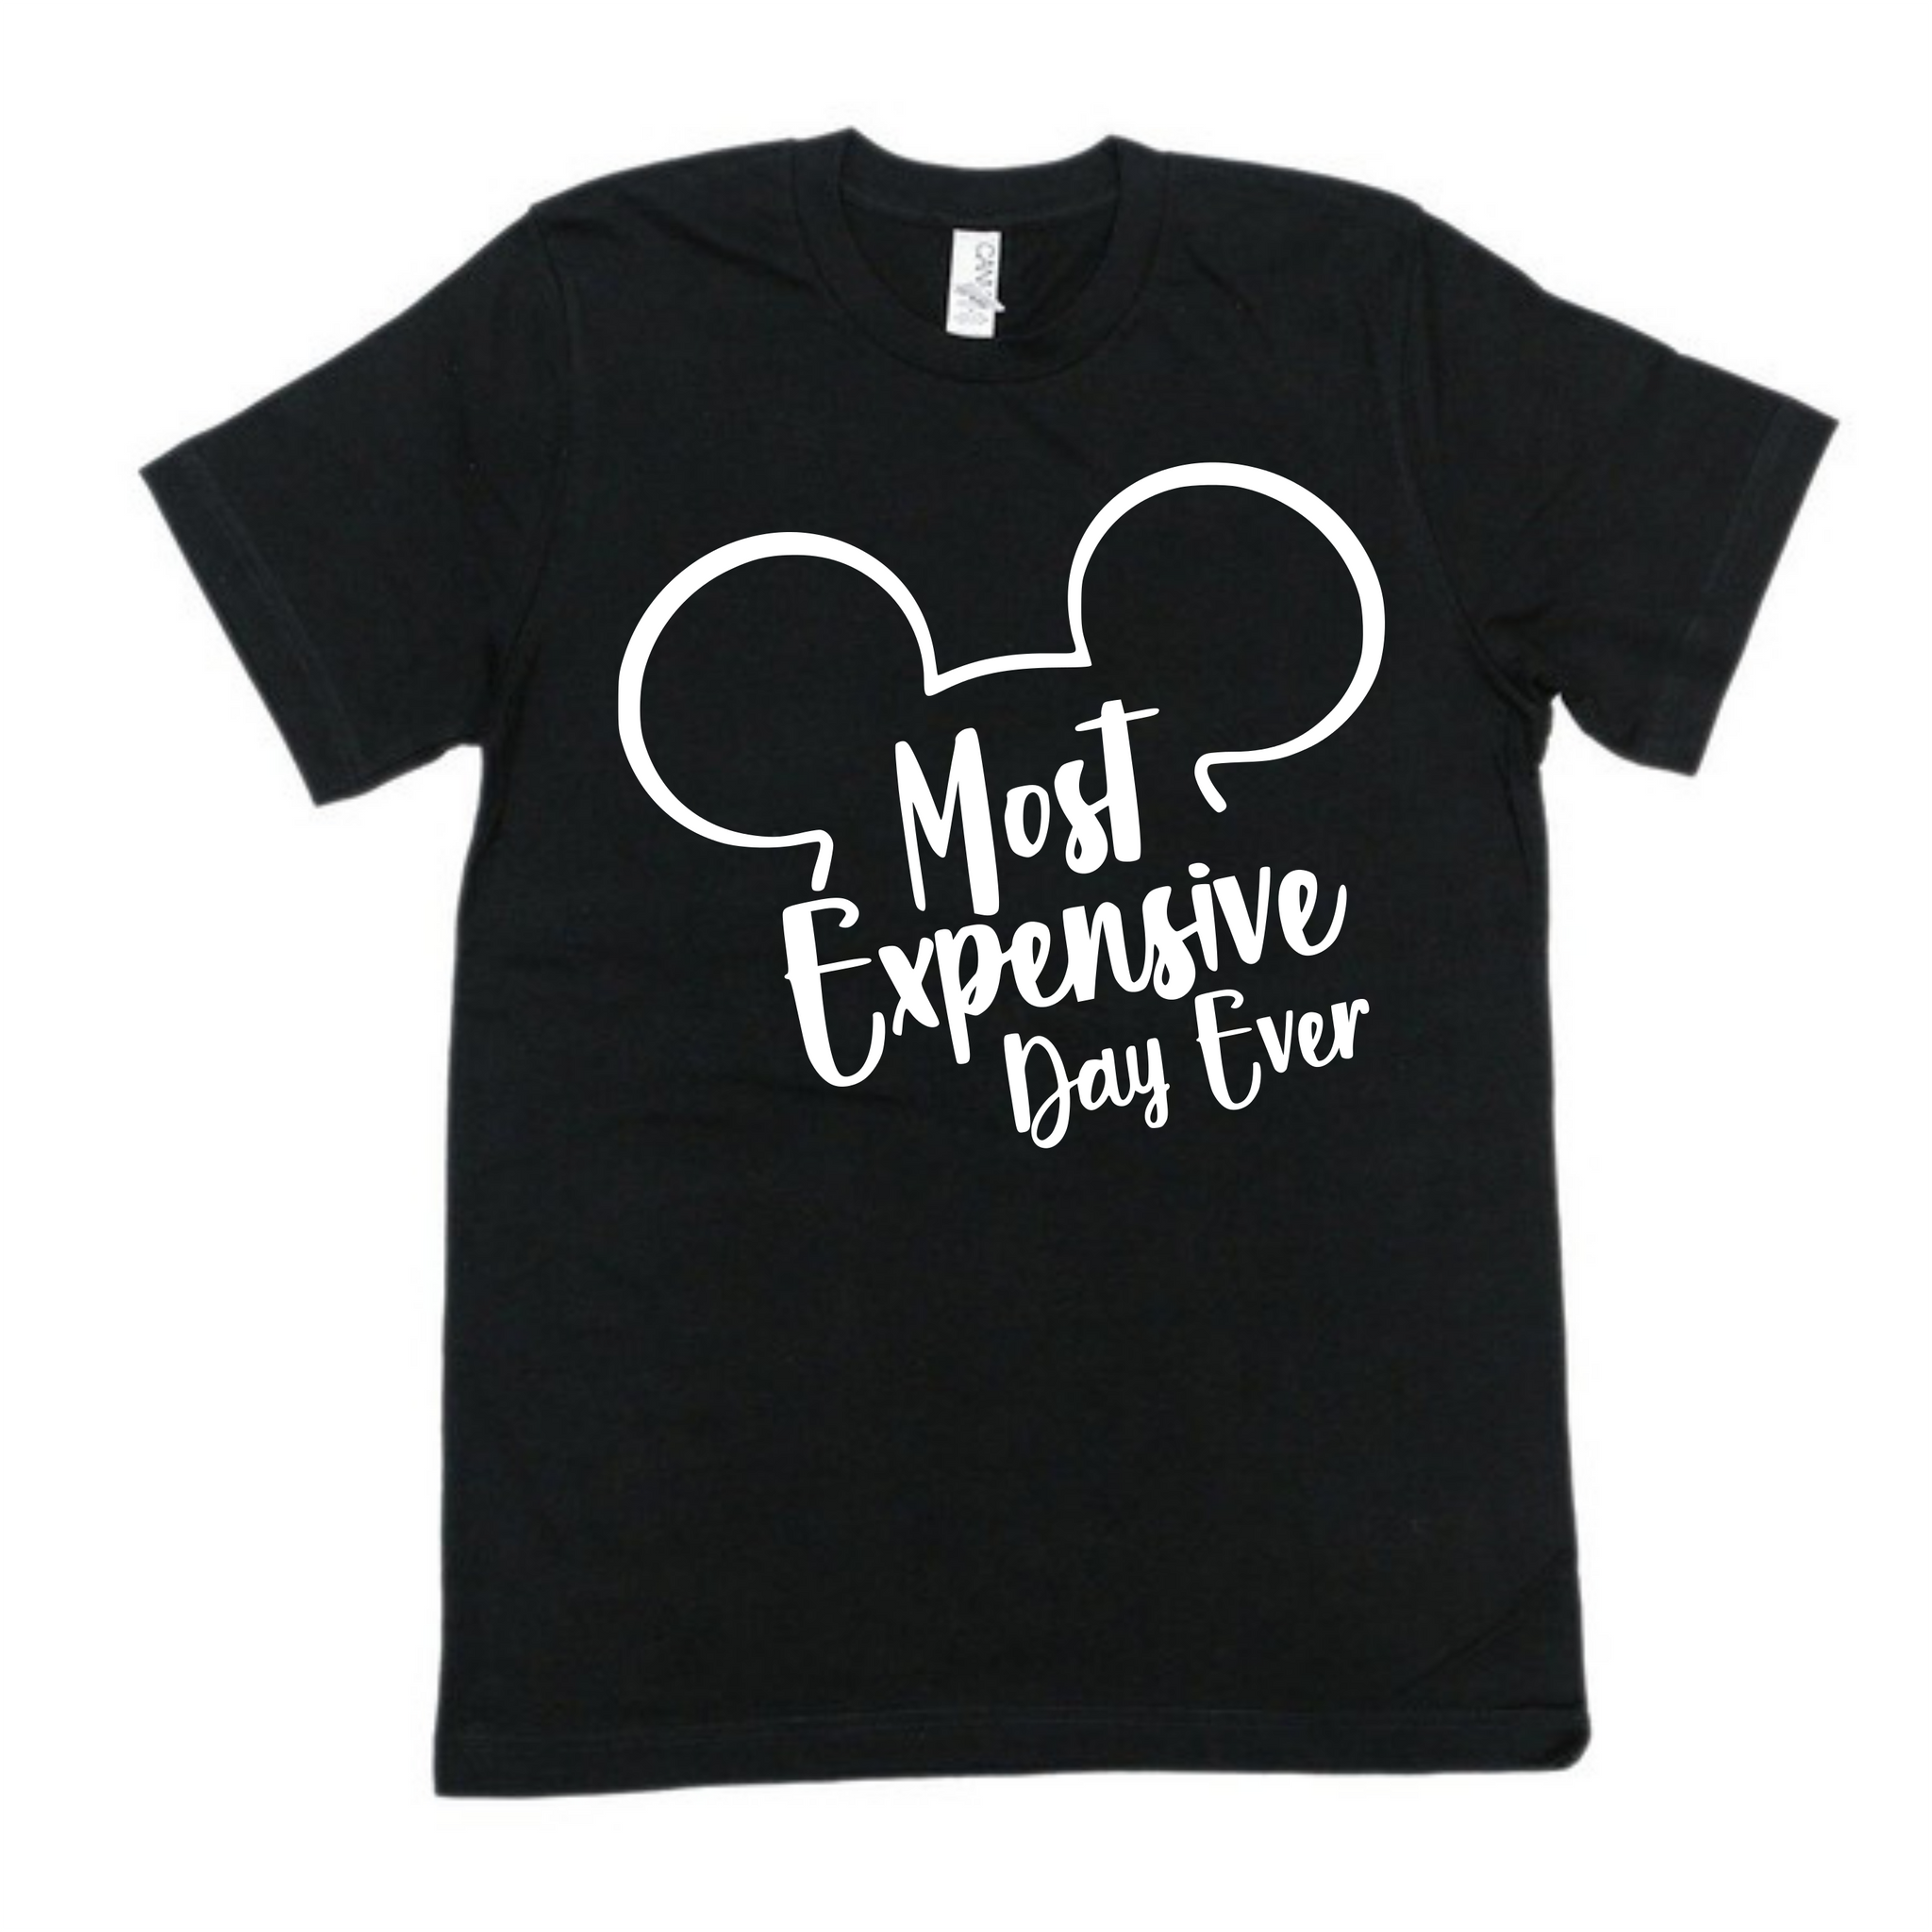 MOST EXPENSIVE DAY EVER ADULT SHIRT